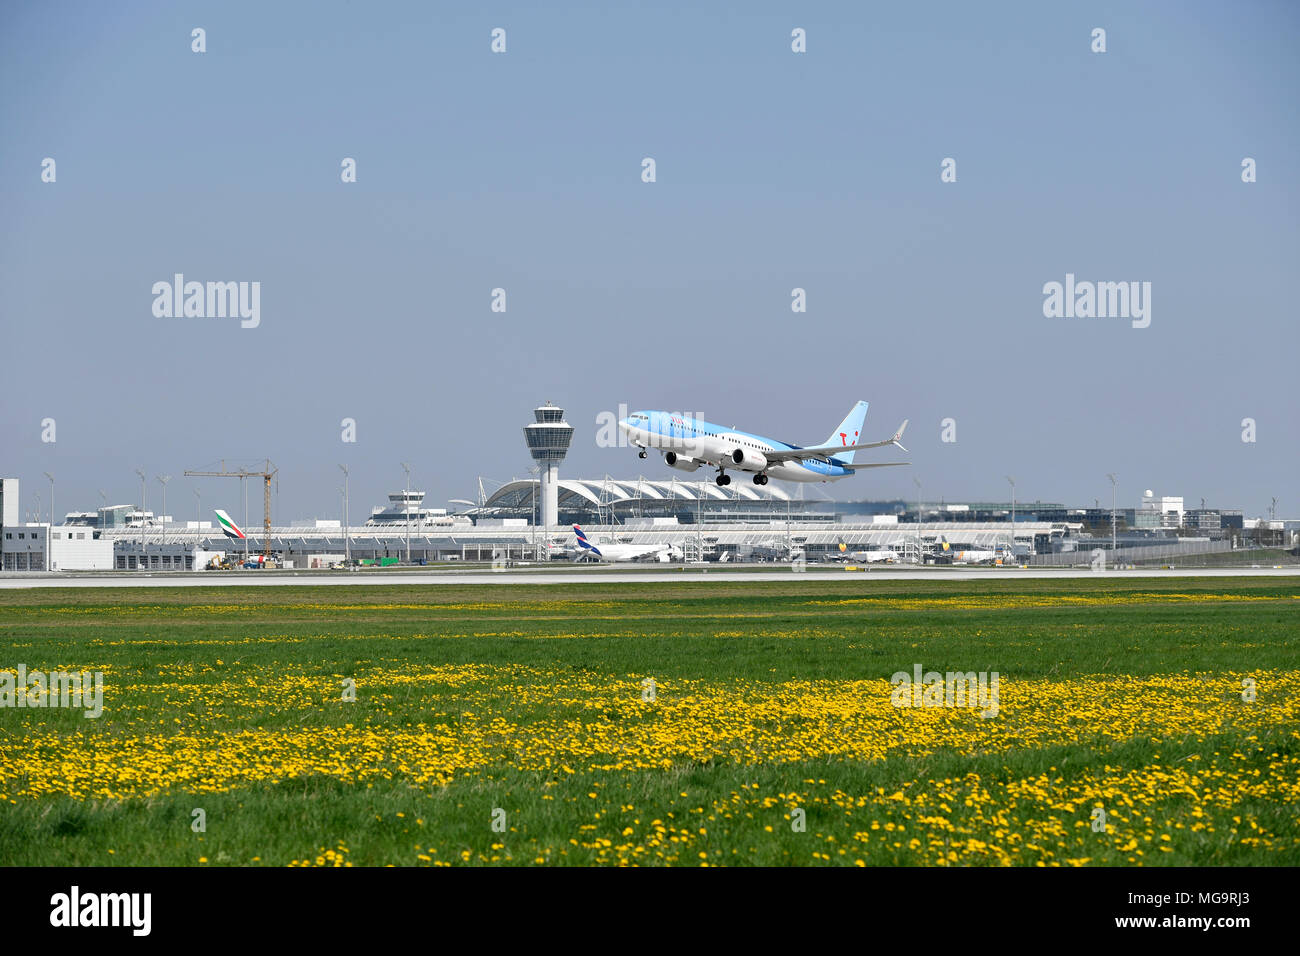 Tuifly, Tui, Tui fly, fly, B 737, B737-800, 800, Aircraft, Airplane, Plane, Overview, View, Panorama, Flower, weed, Grass, Start, Take of, MUC Stock Photo